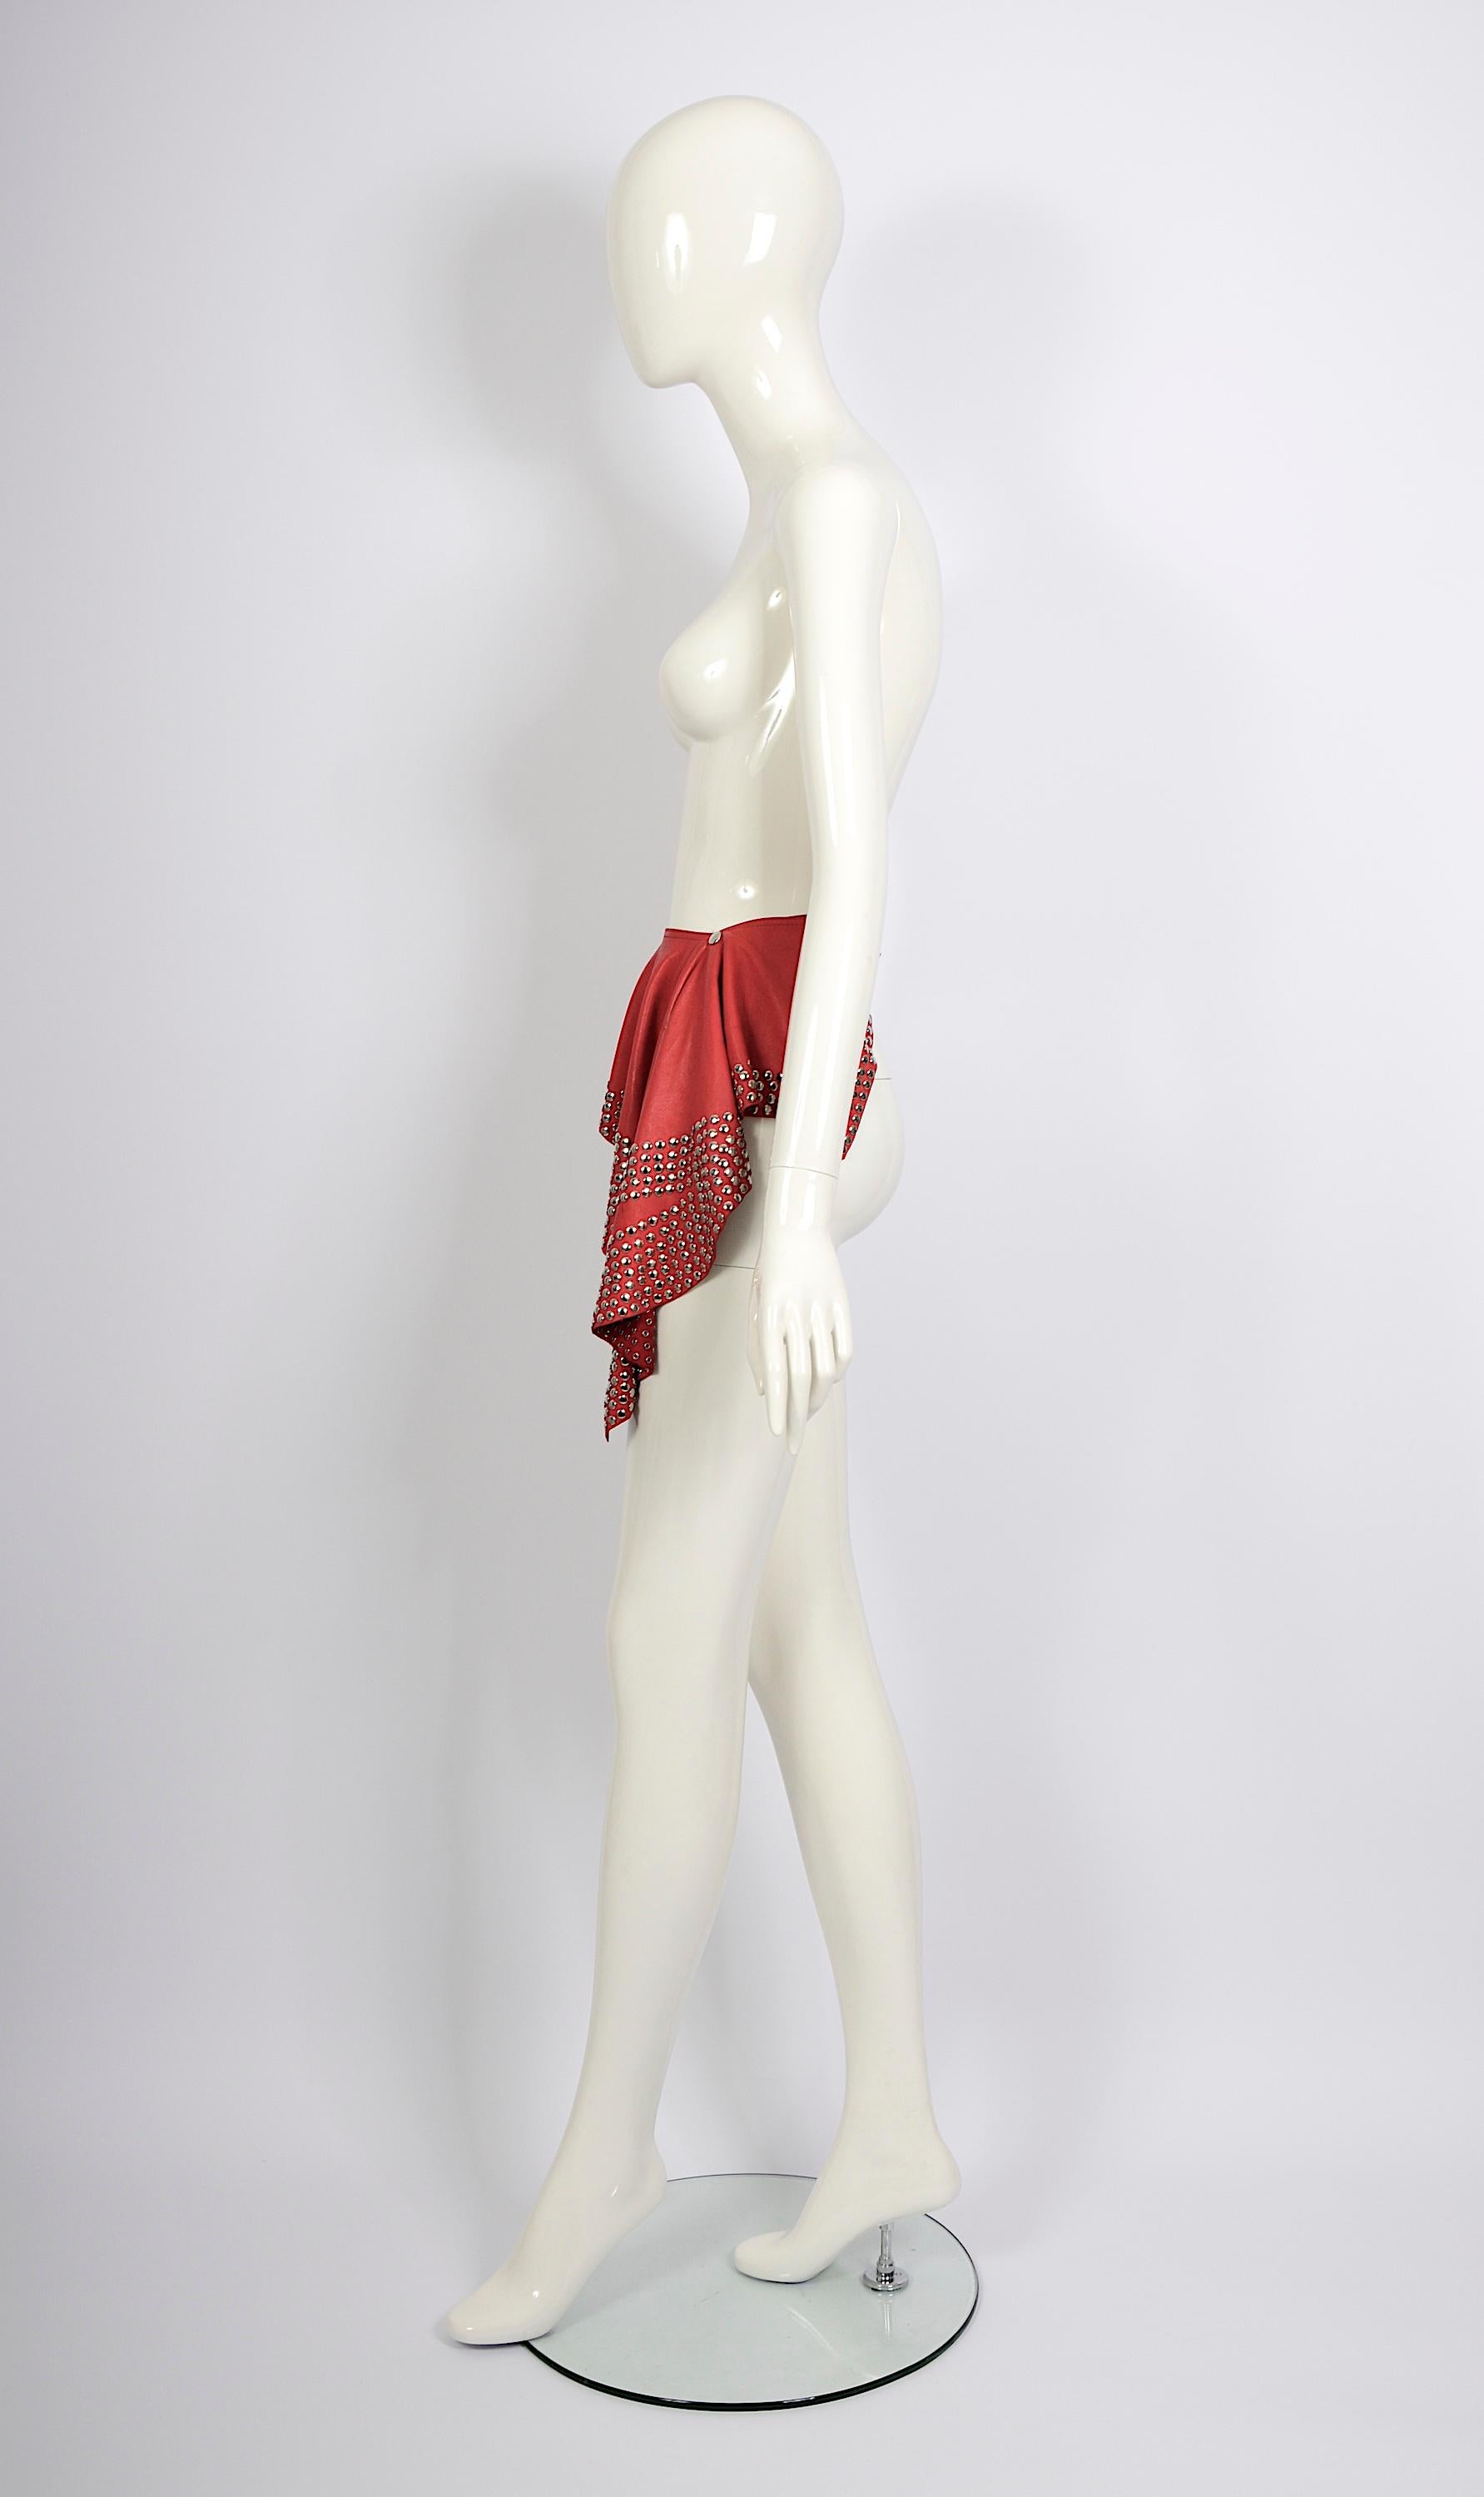 Azzedine Alaia circa 1981 collectors studded embellished red leather belt skirt For Sale 6